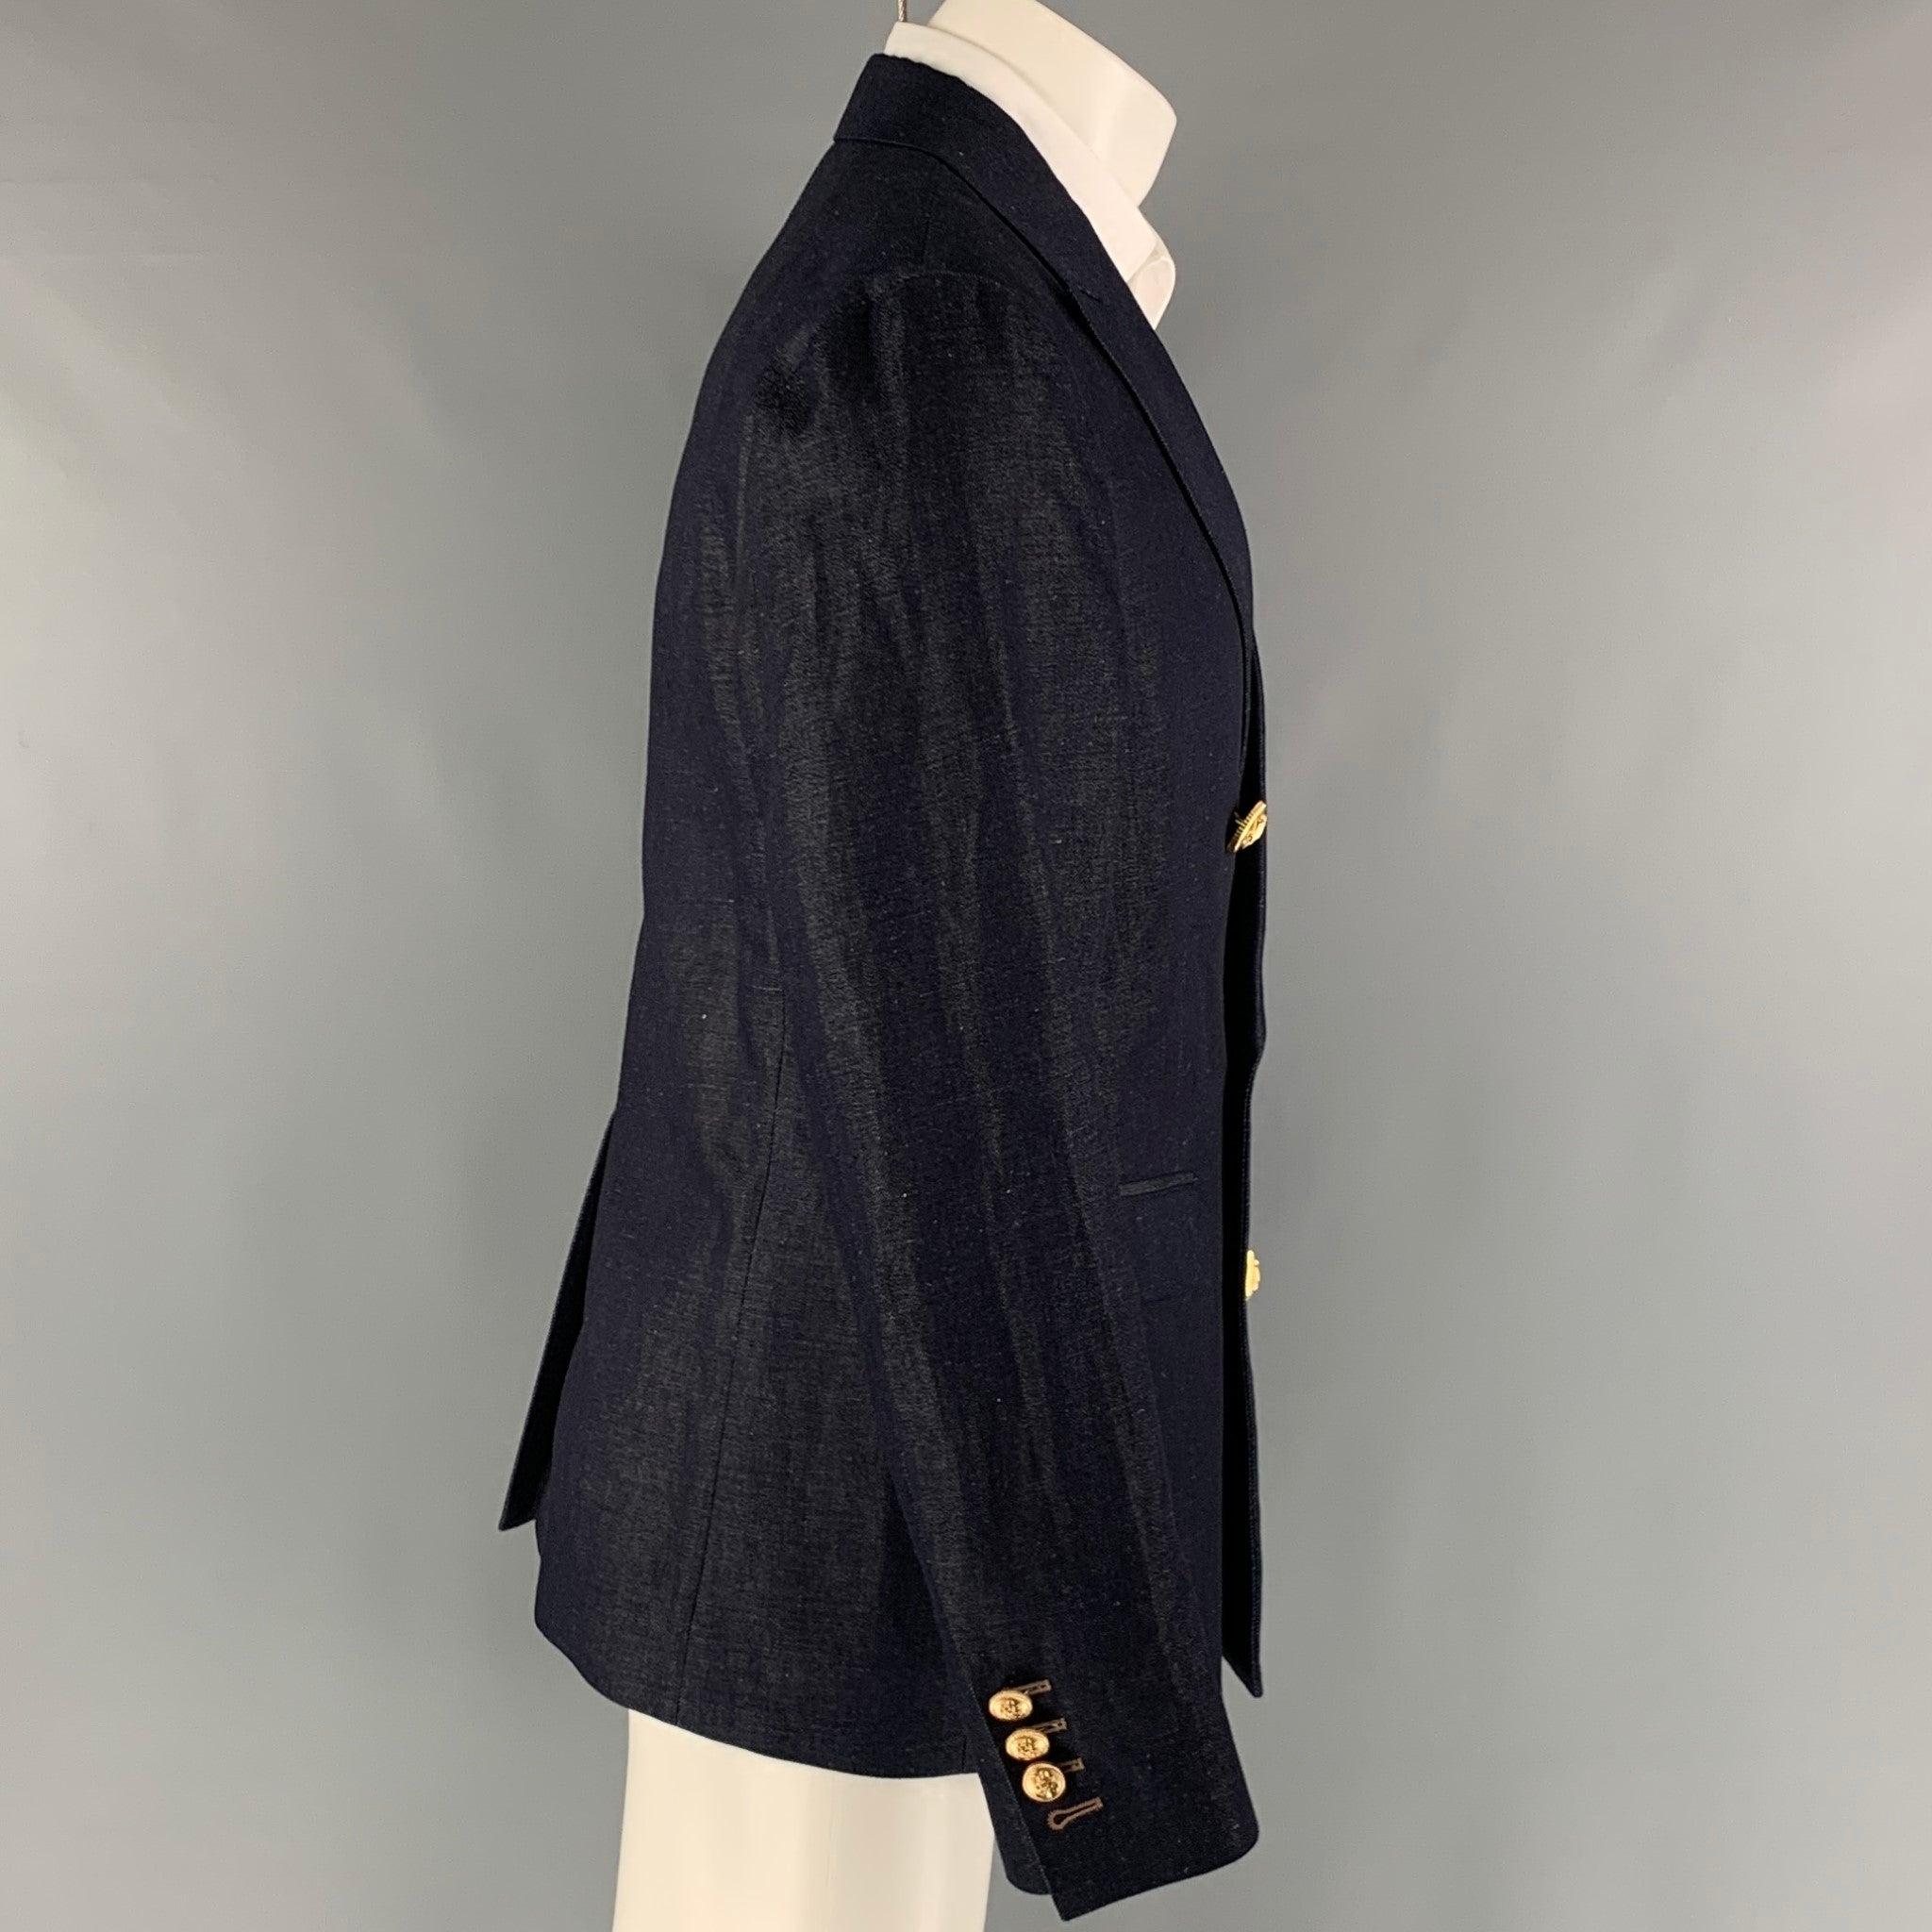 DSQUARED2 sport coat comes in an indigo cotton and linen twill material with a half liner featuring a peak lapel, single back vent, flap pockets, gold tone buttons, and a double breasted closure. Made in Italy. Excellent Pre- Owned Material.